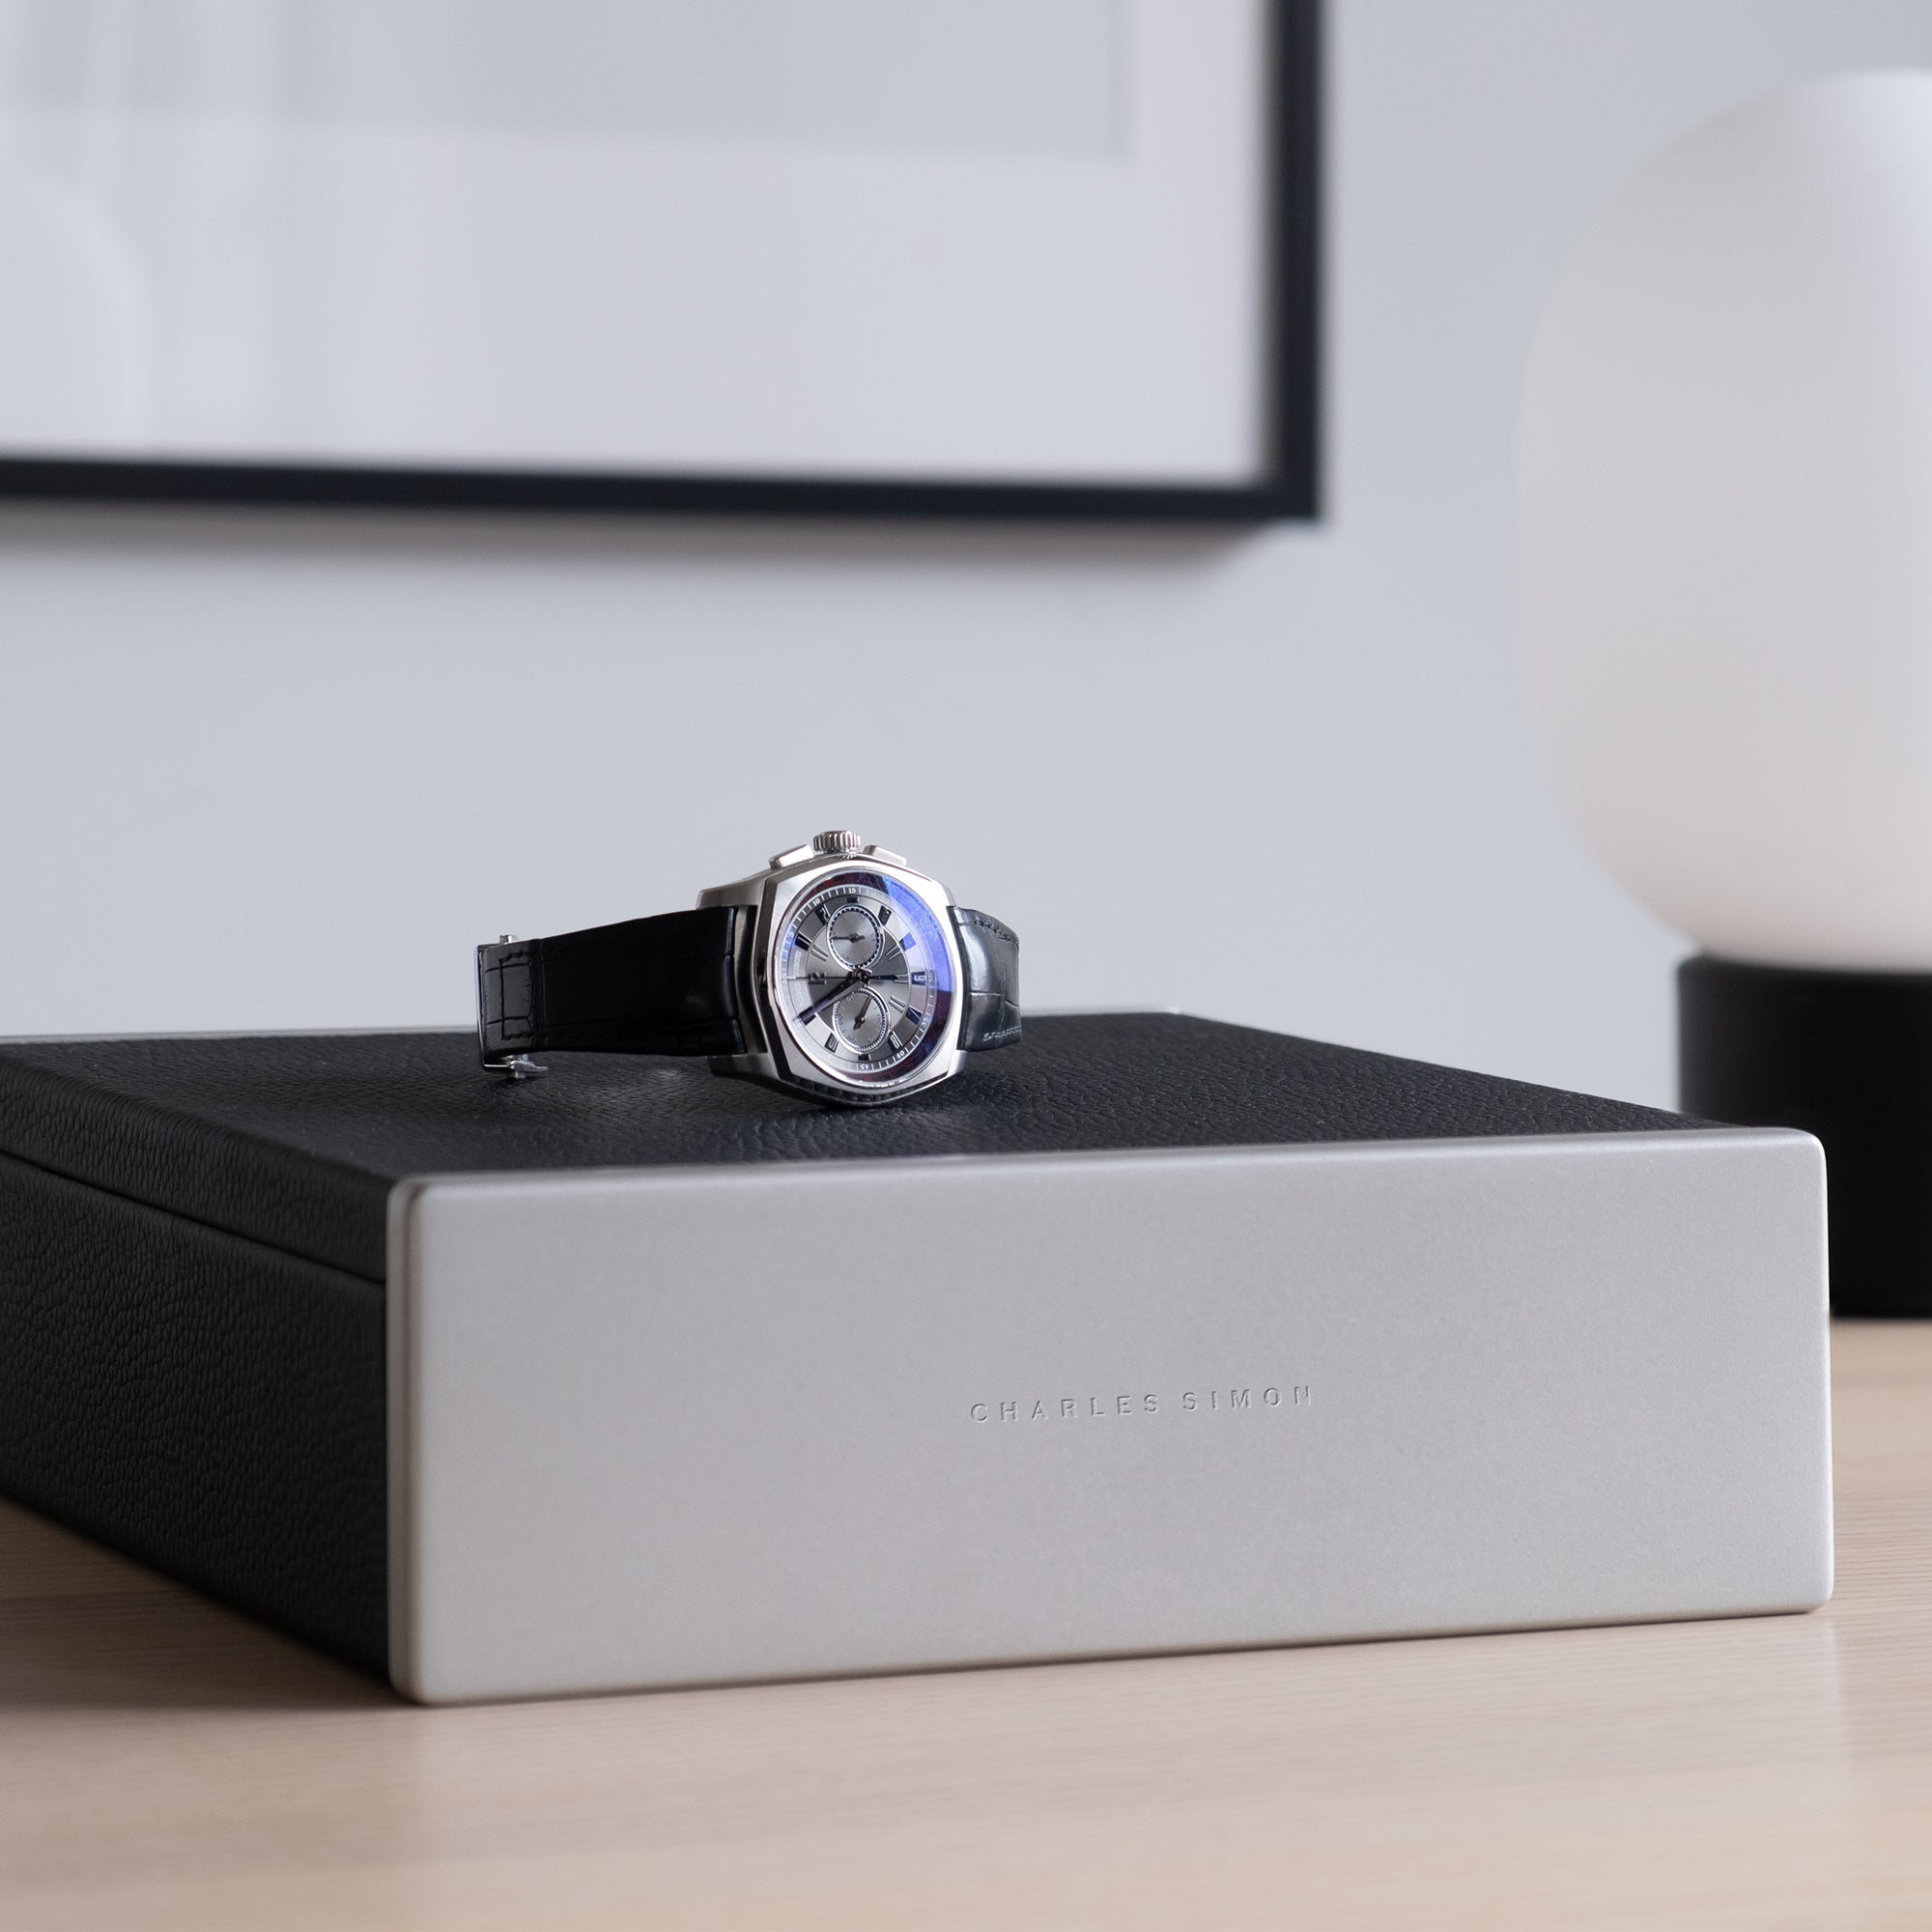 Luxury men's watch placed on top of black leather Spence watch box in modern apartment